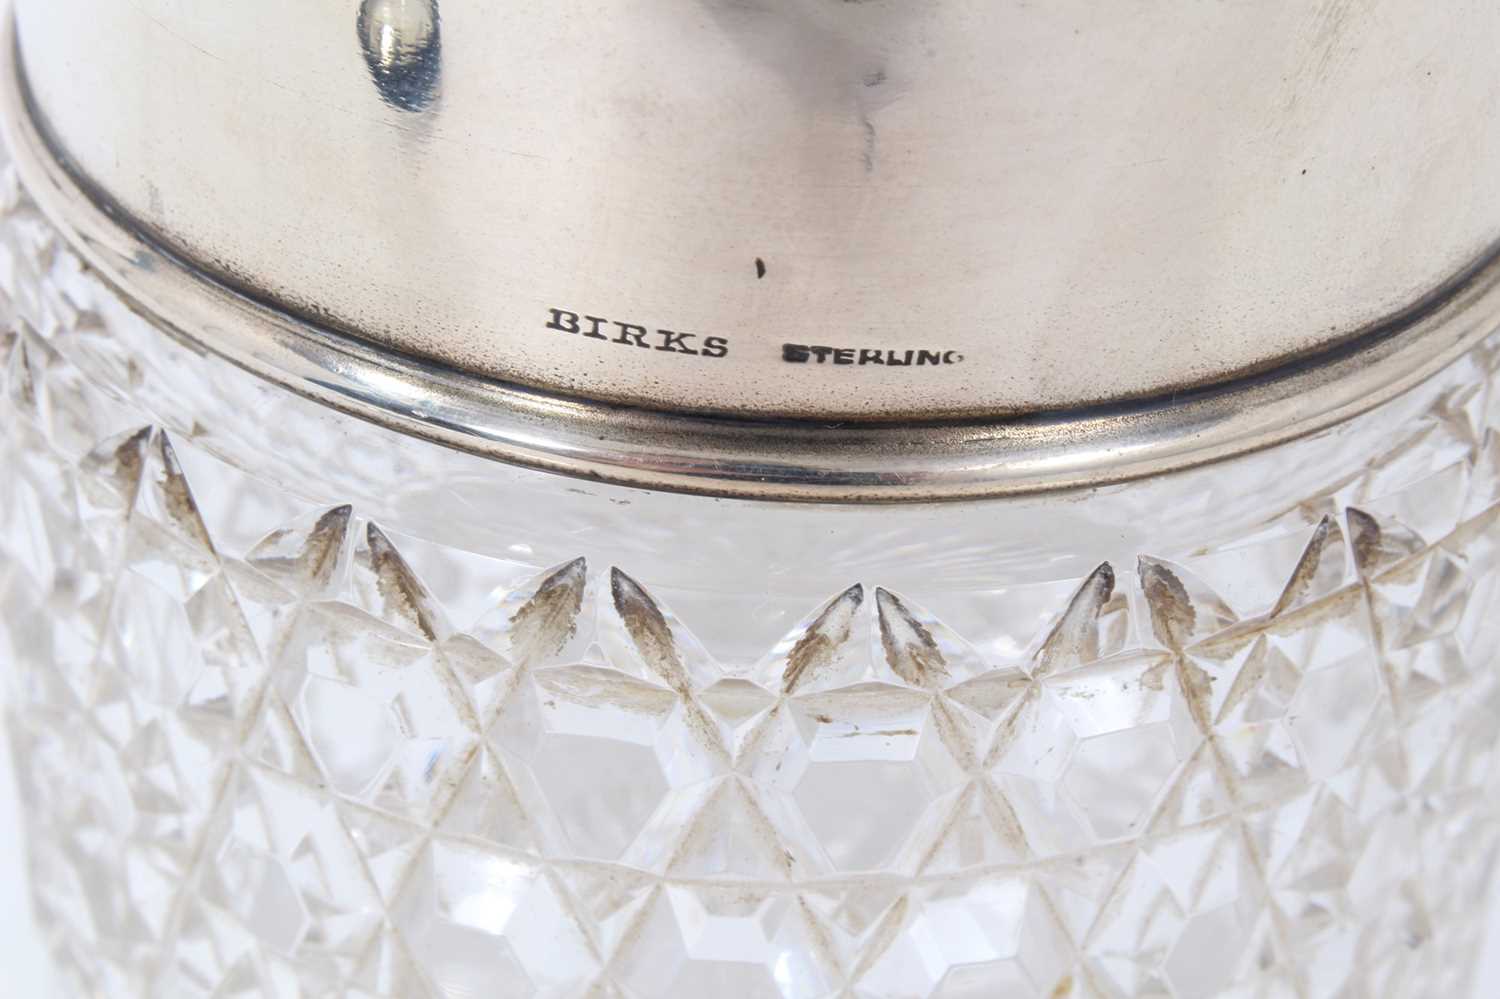 Large early 20th century American silver and cut glass scent bottle, removable top with embossed scr - Image 2 of 3